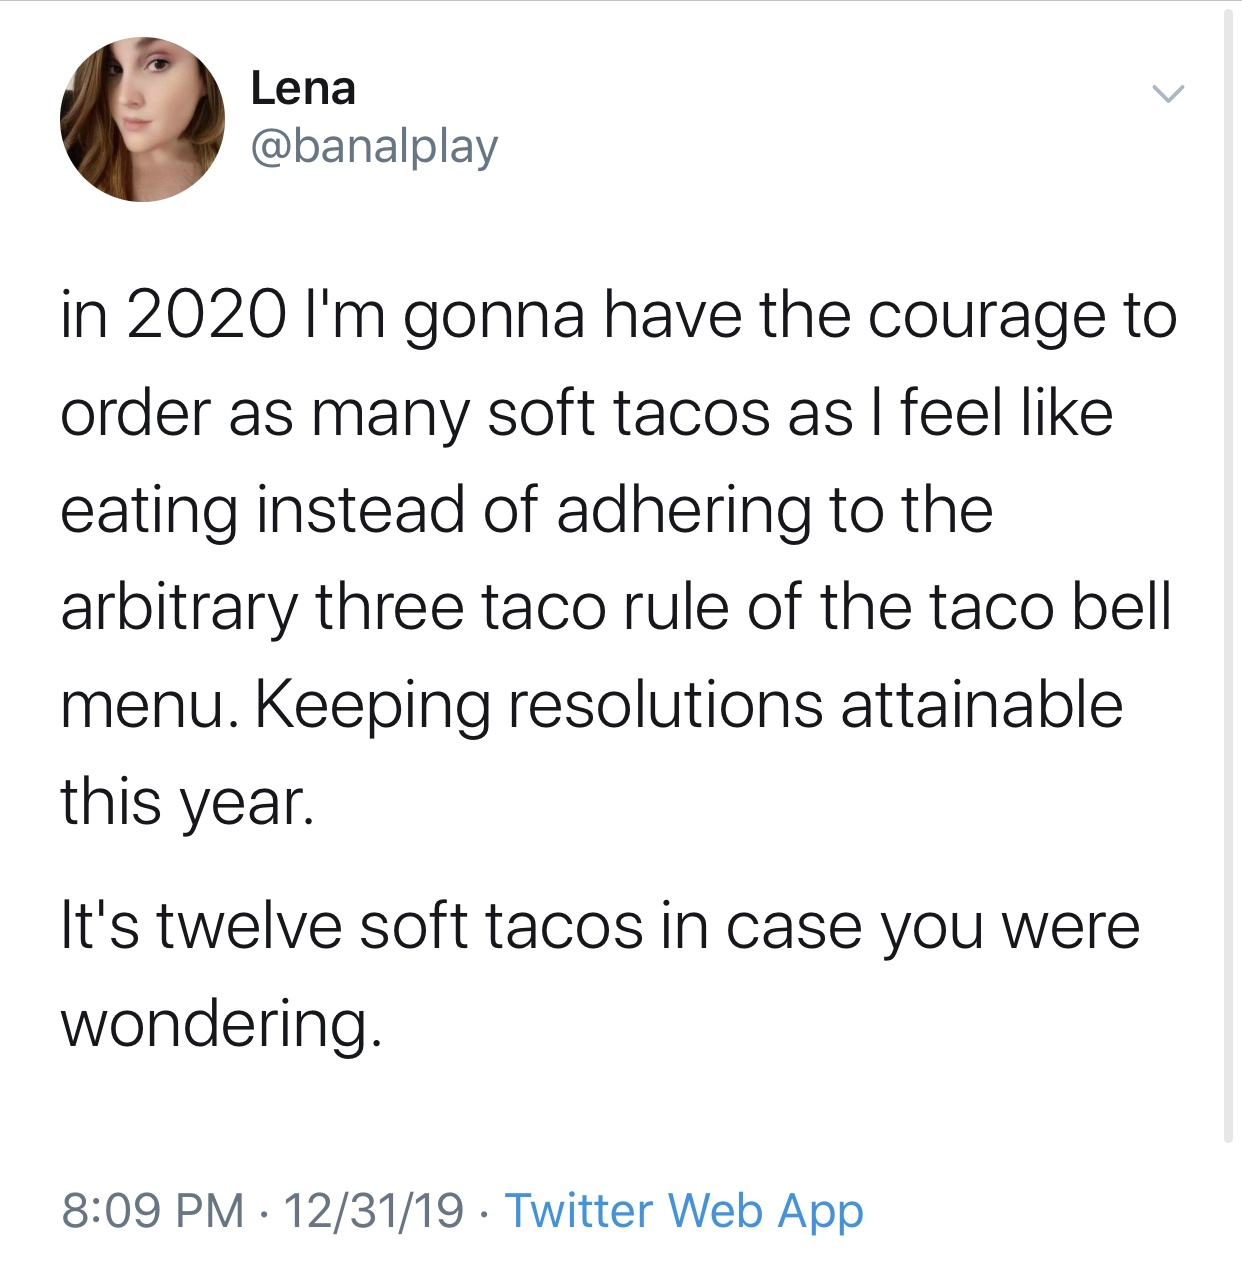 2020 memes - gatorade officer meme - Lena in 2020 I'm gonna have the courage to order as many soft tacos as I feel eating instead of adhering to the arbitrary three taco rule of the taco bell menu. Keeping resolutions attainable this year. It's twelve sof